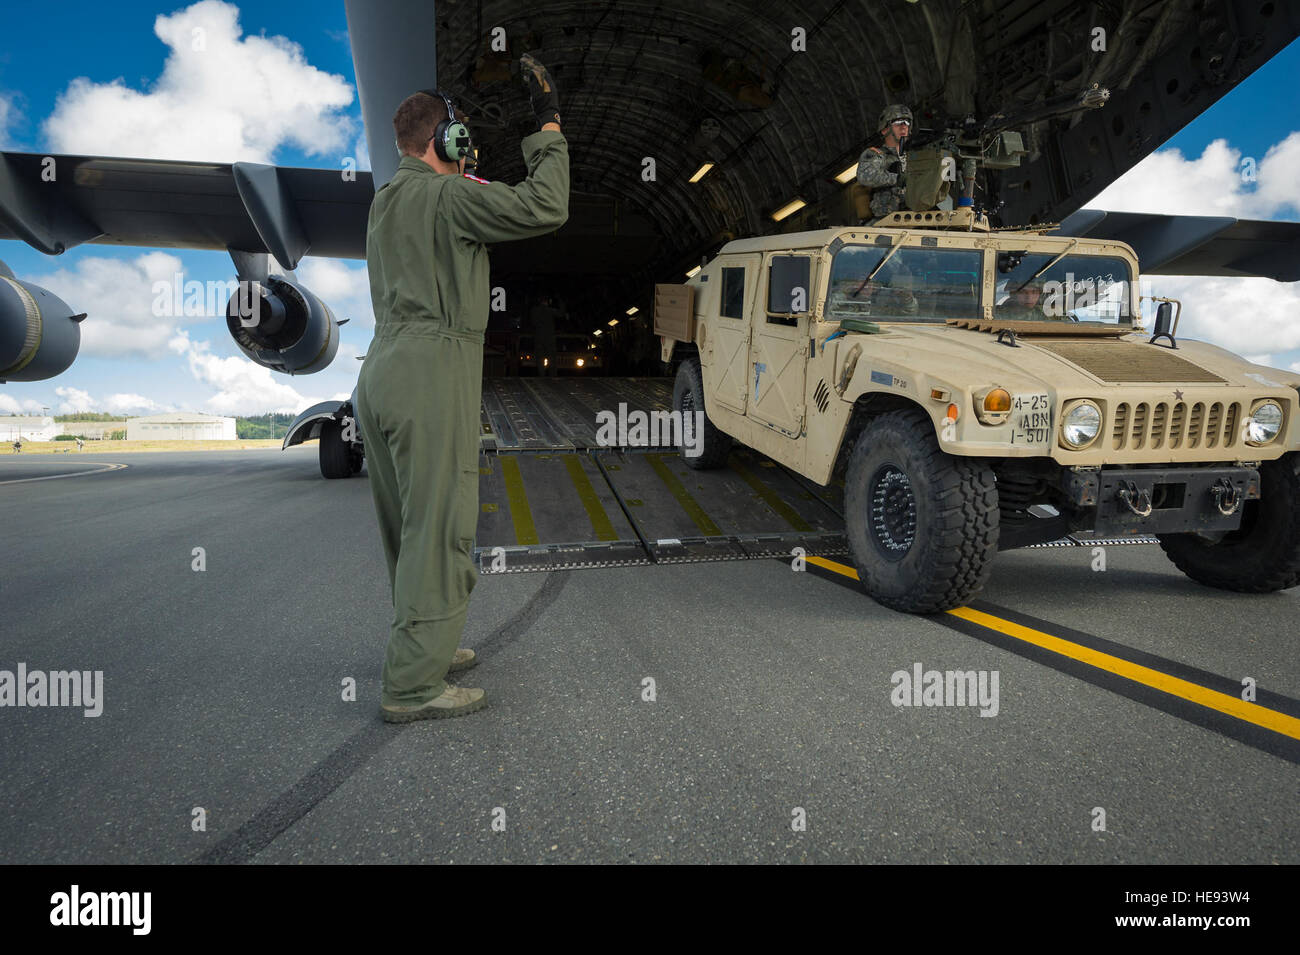 Air Force Staff Sgt. Joe Braunwarth, loadmaster with the 517th Airlift Squadron, Joint Base Elmendorf-Richardson, Alaska, marshals a humvee off of a C-17 Globemaster III as part of a show of force demonstration for Arctic Thunder Open House 2014, July 26, 2014. Arctic Thunder is a biennial event hosted by JBER. Featuring more than 40 Air Force, Army and civilian aerial acts and an expected crowd of more than 200,000 people, it is the largest two-day event in the state and one of the premier aerial demonstrations in the world. The 2014 Arctic Thunder Open House is a proud part of the Anchorage  Stock Photo